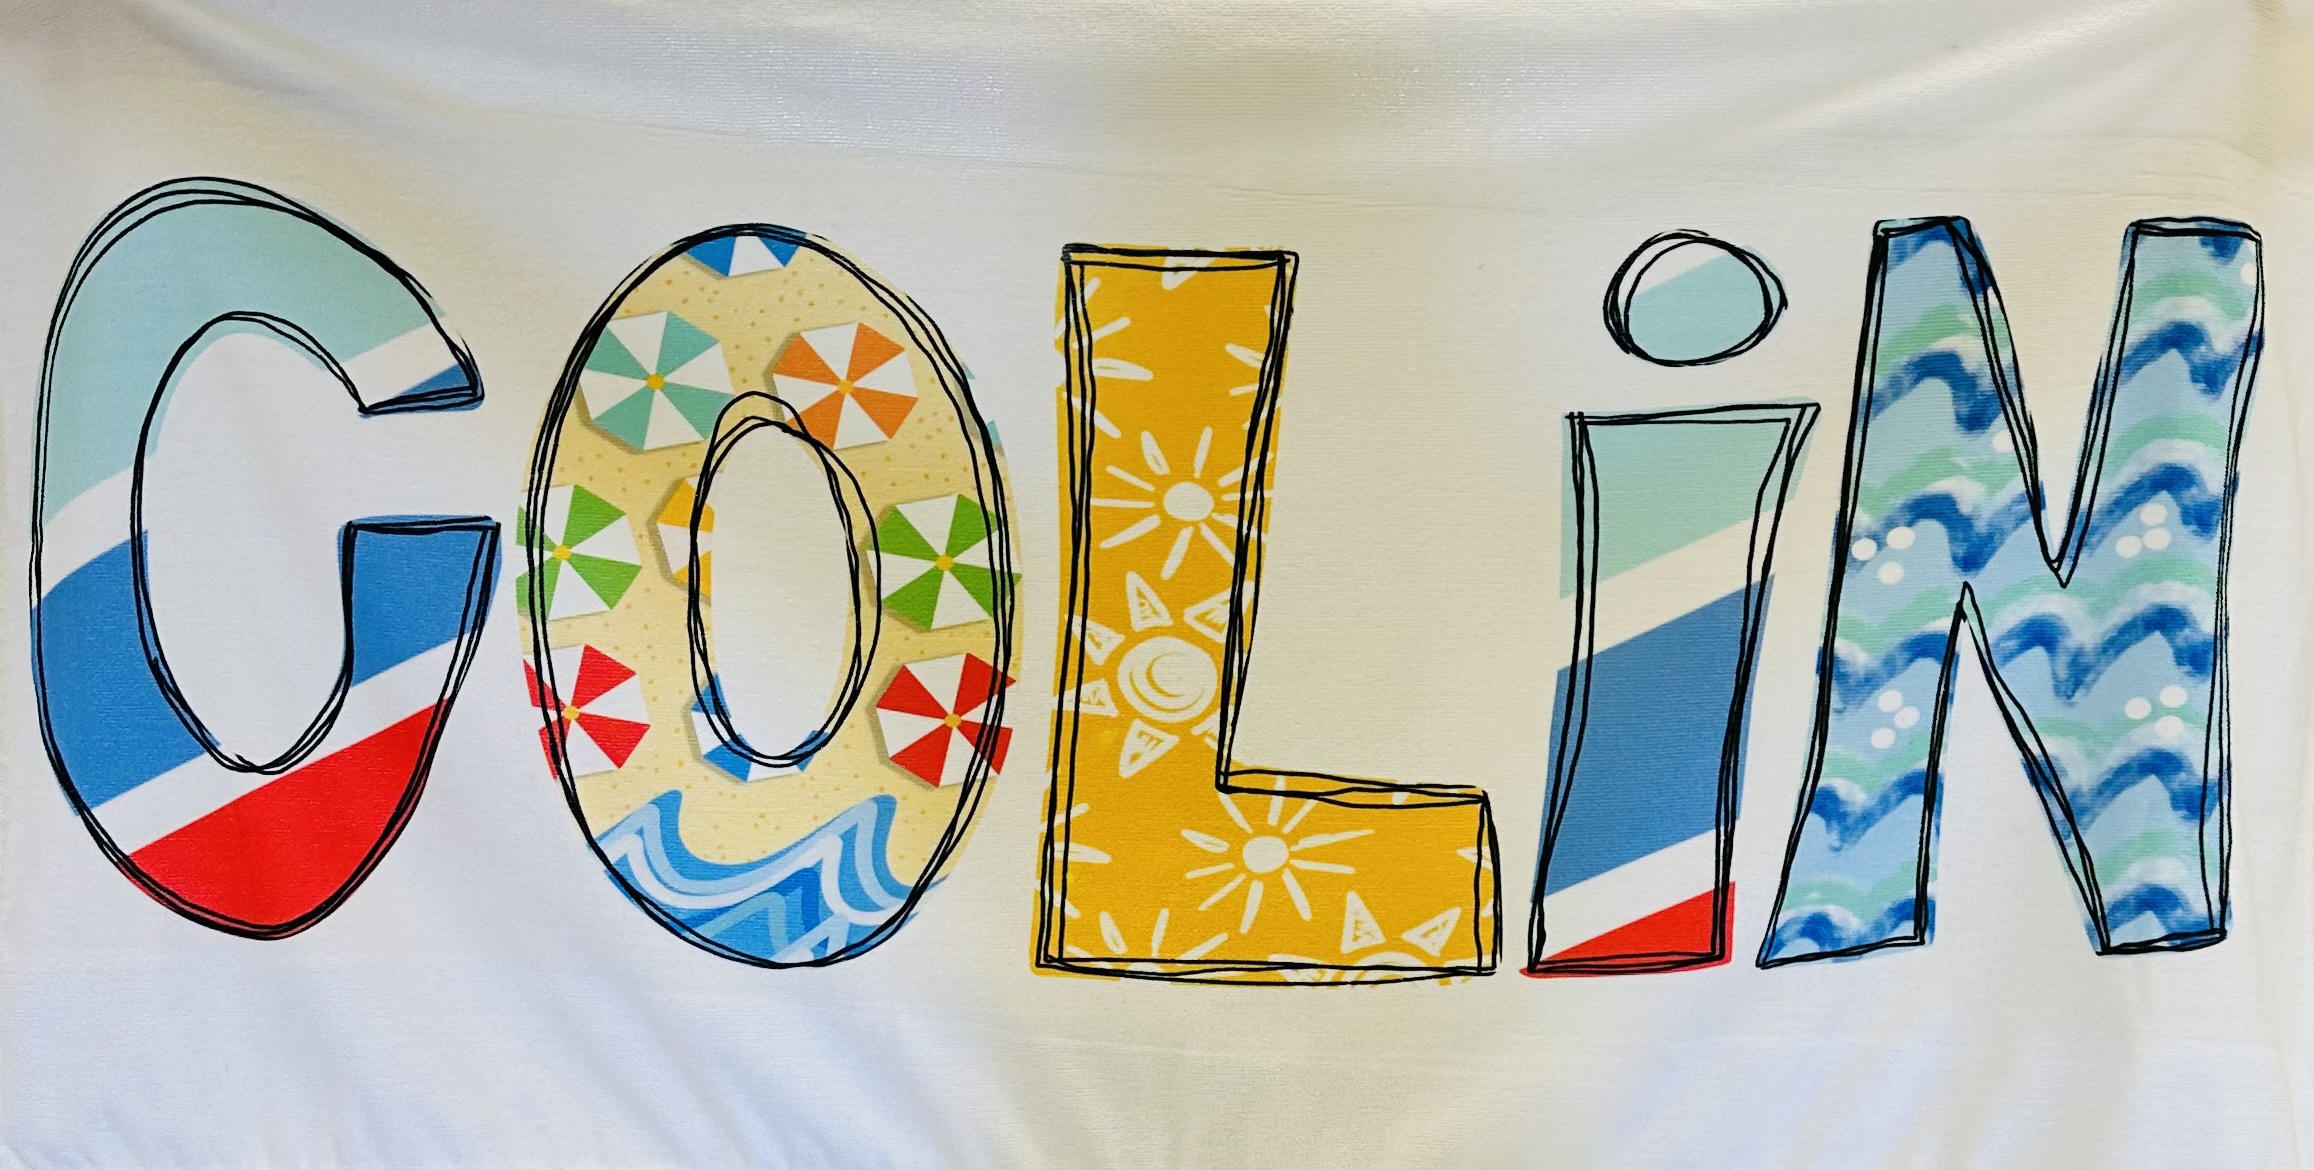 Beach Towel made with sublimation printing